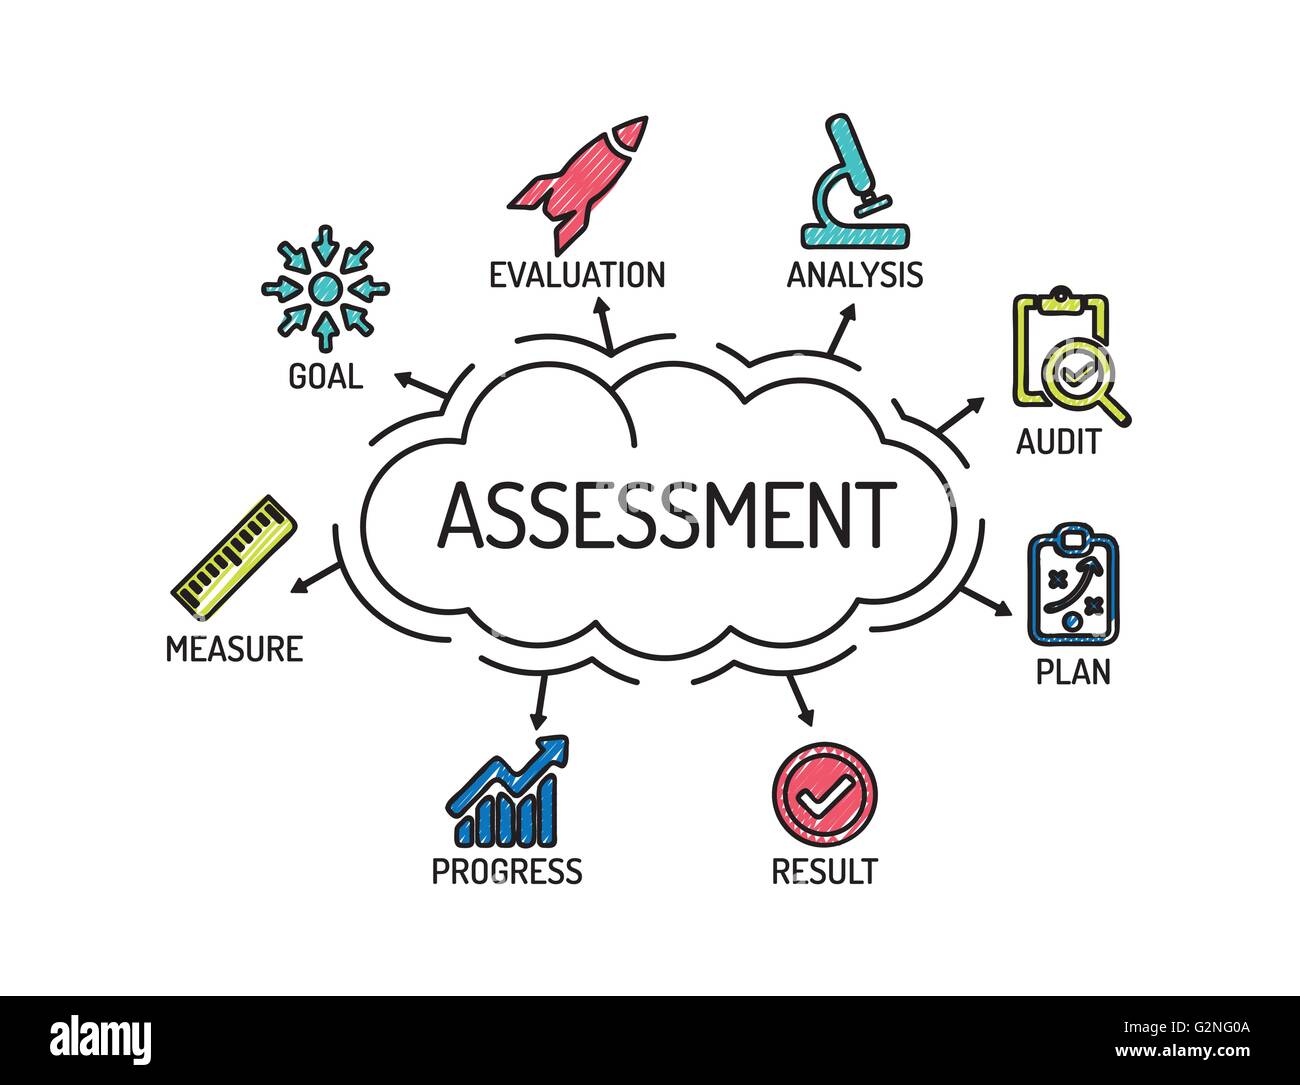 Assessment. Chart with keywords and icons. Sketch. Stock Vector